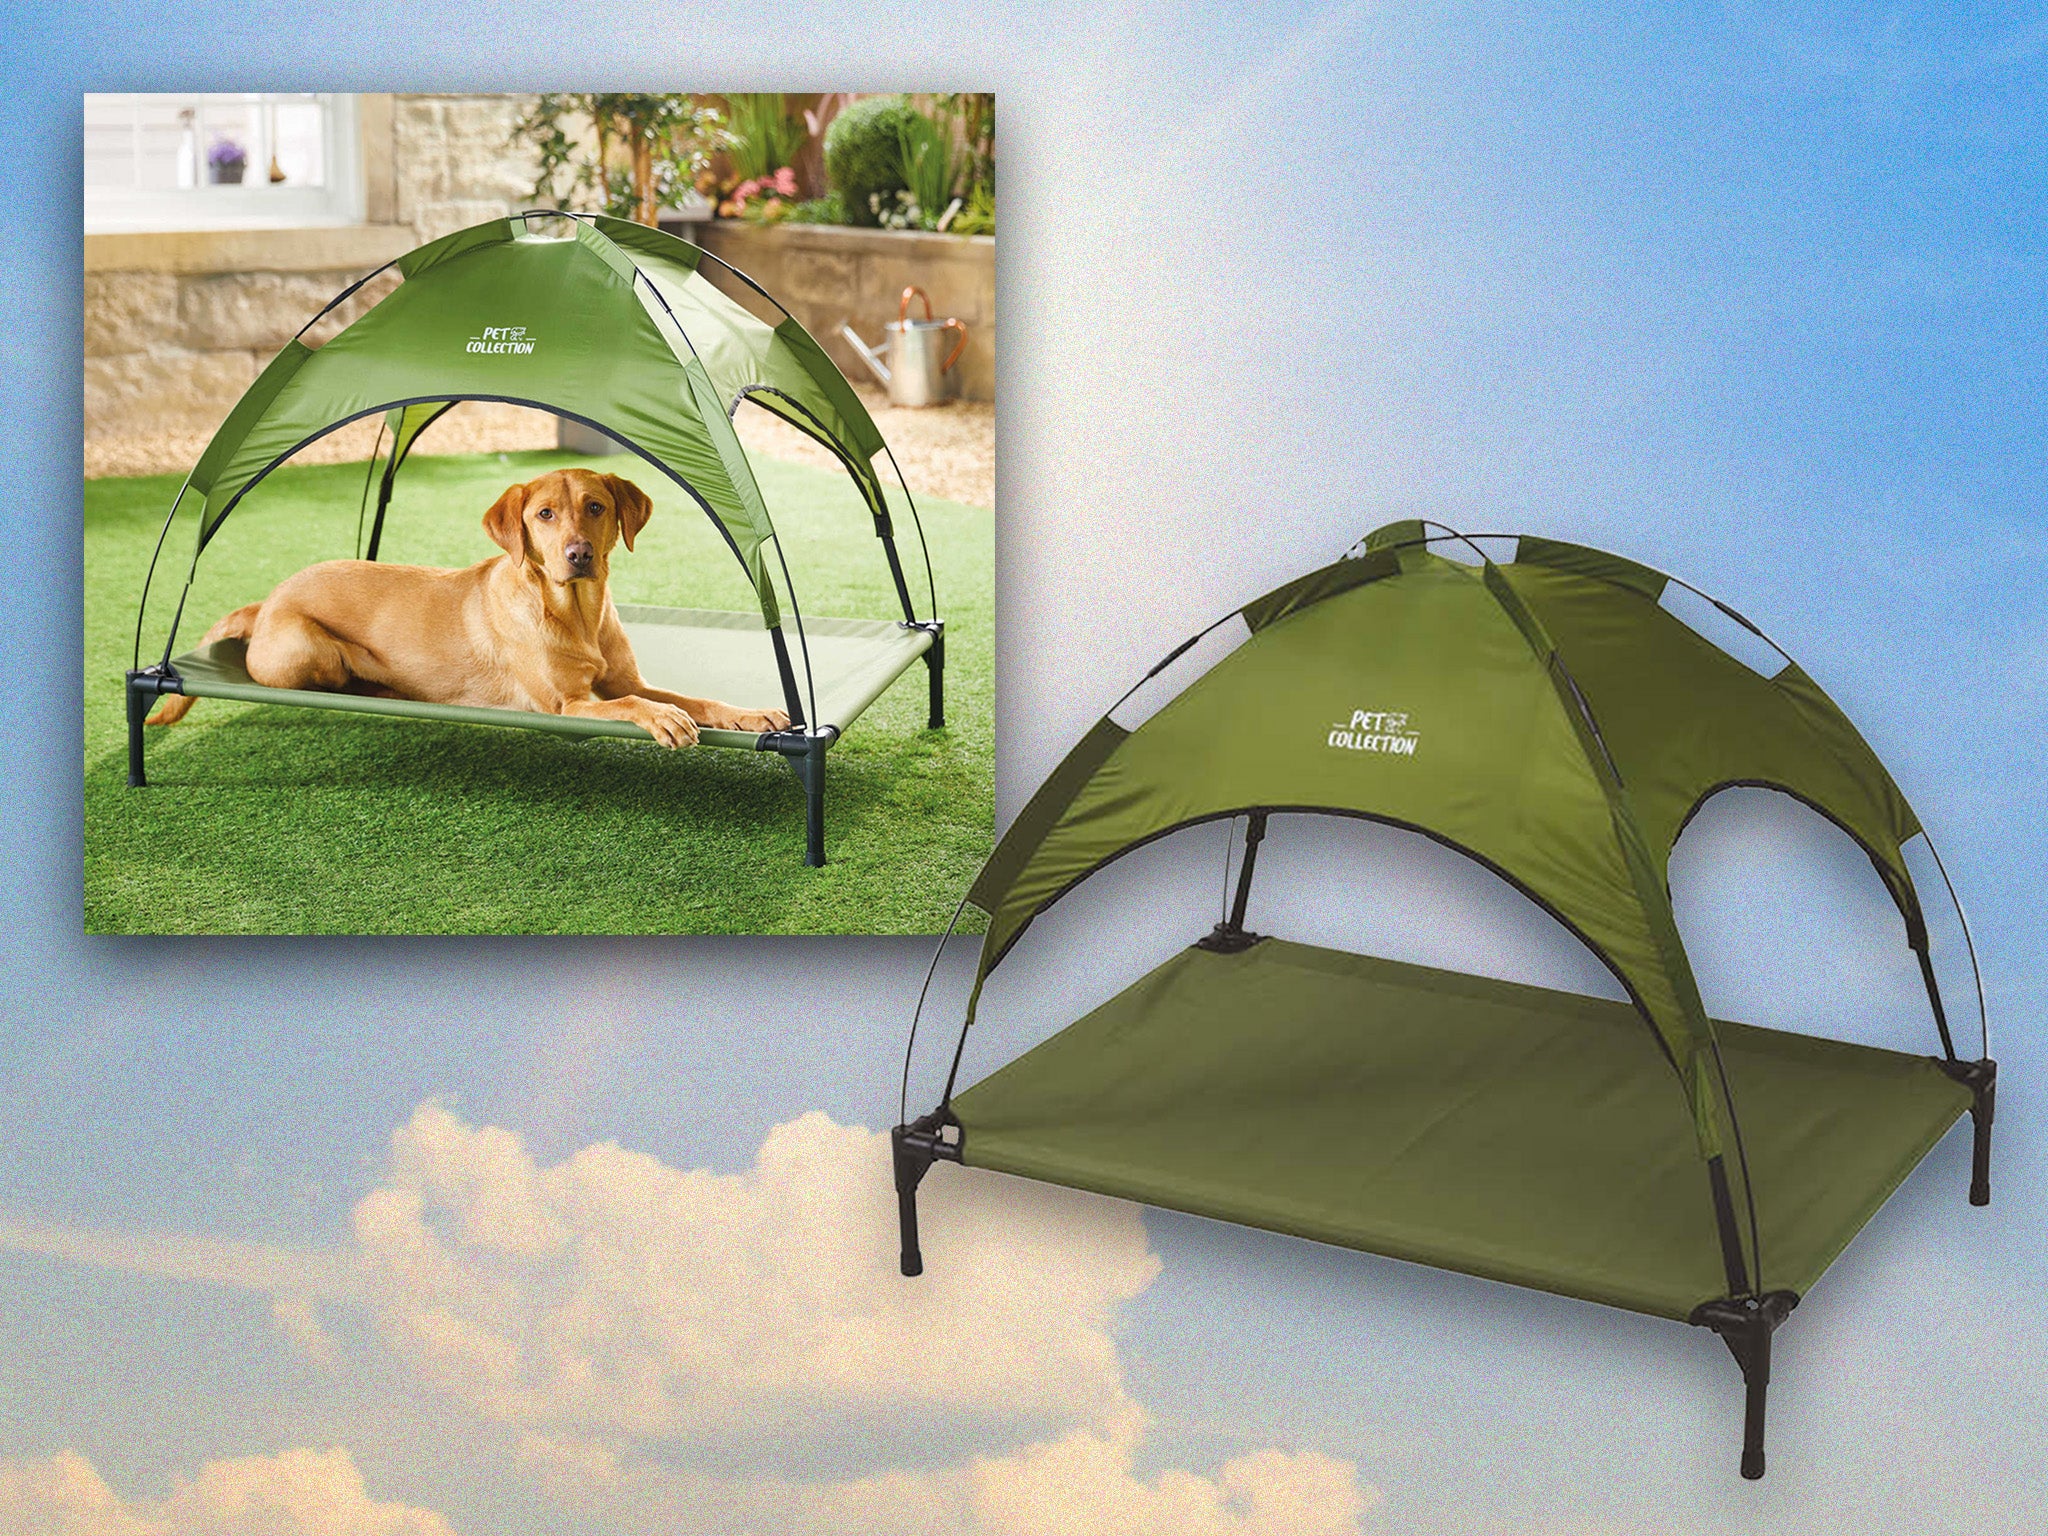 The sunshade canopy provides your dog with UV 50 protection